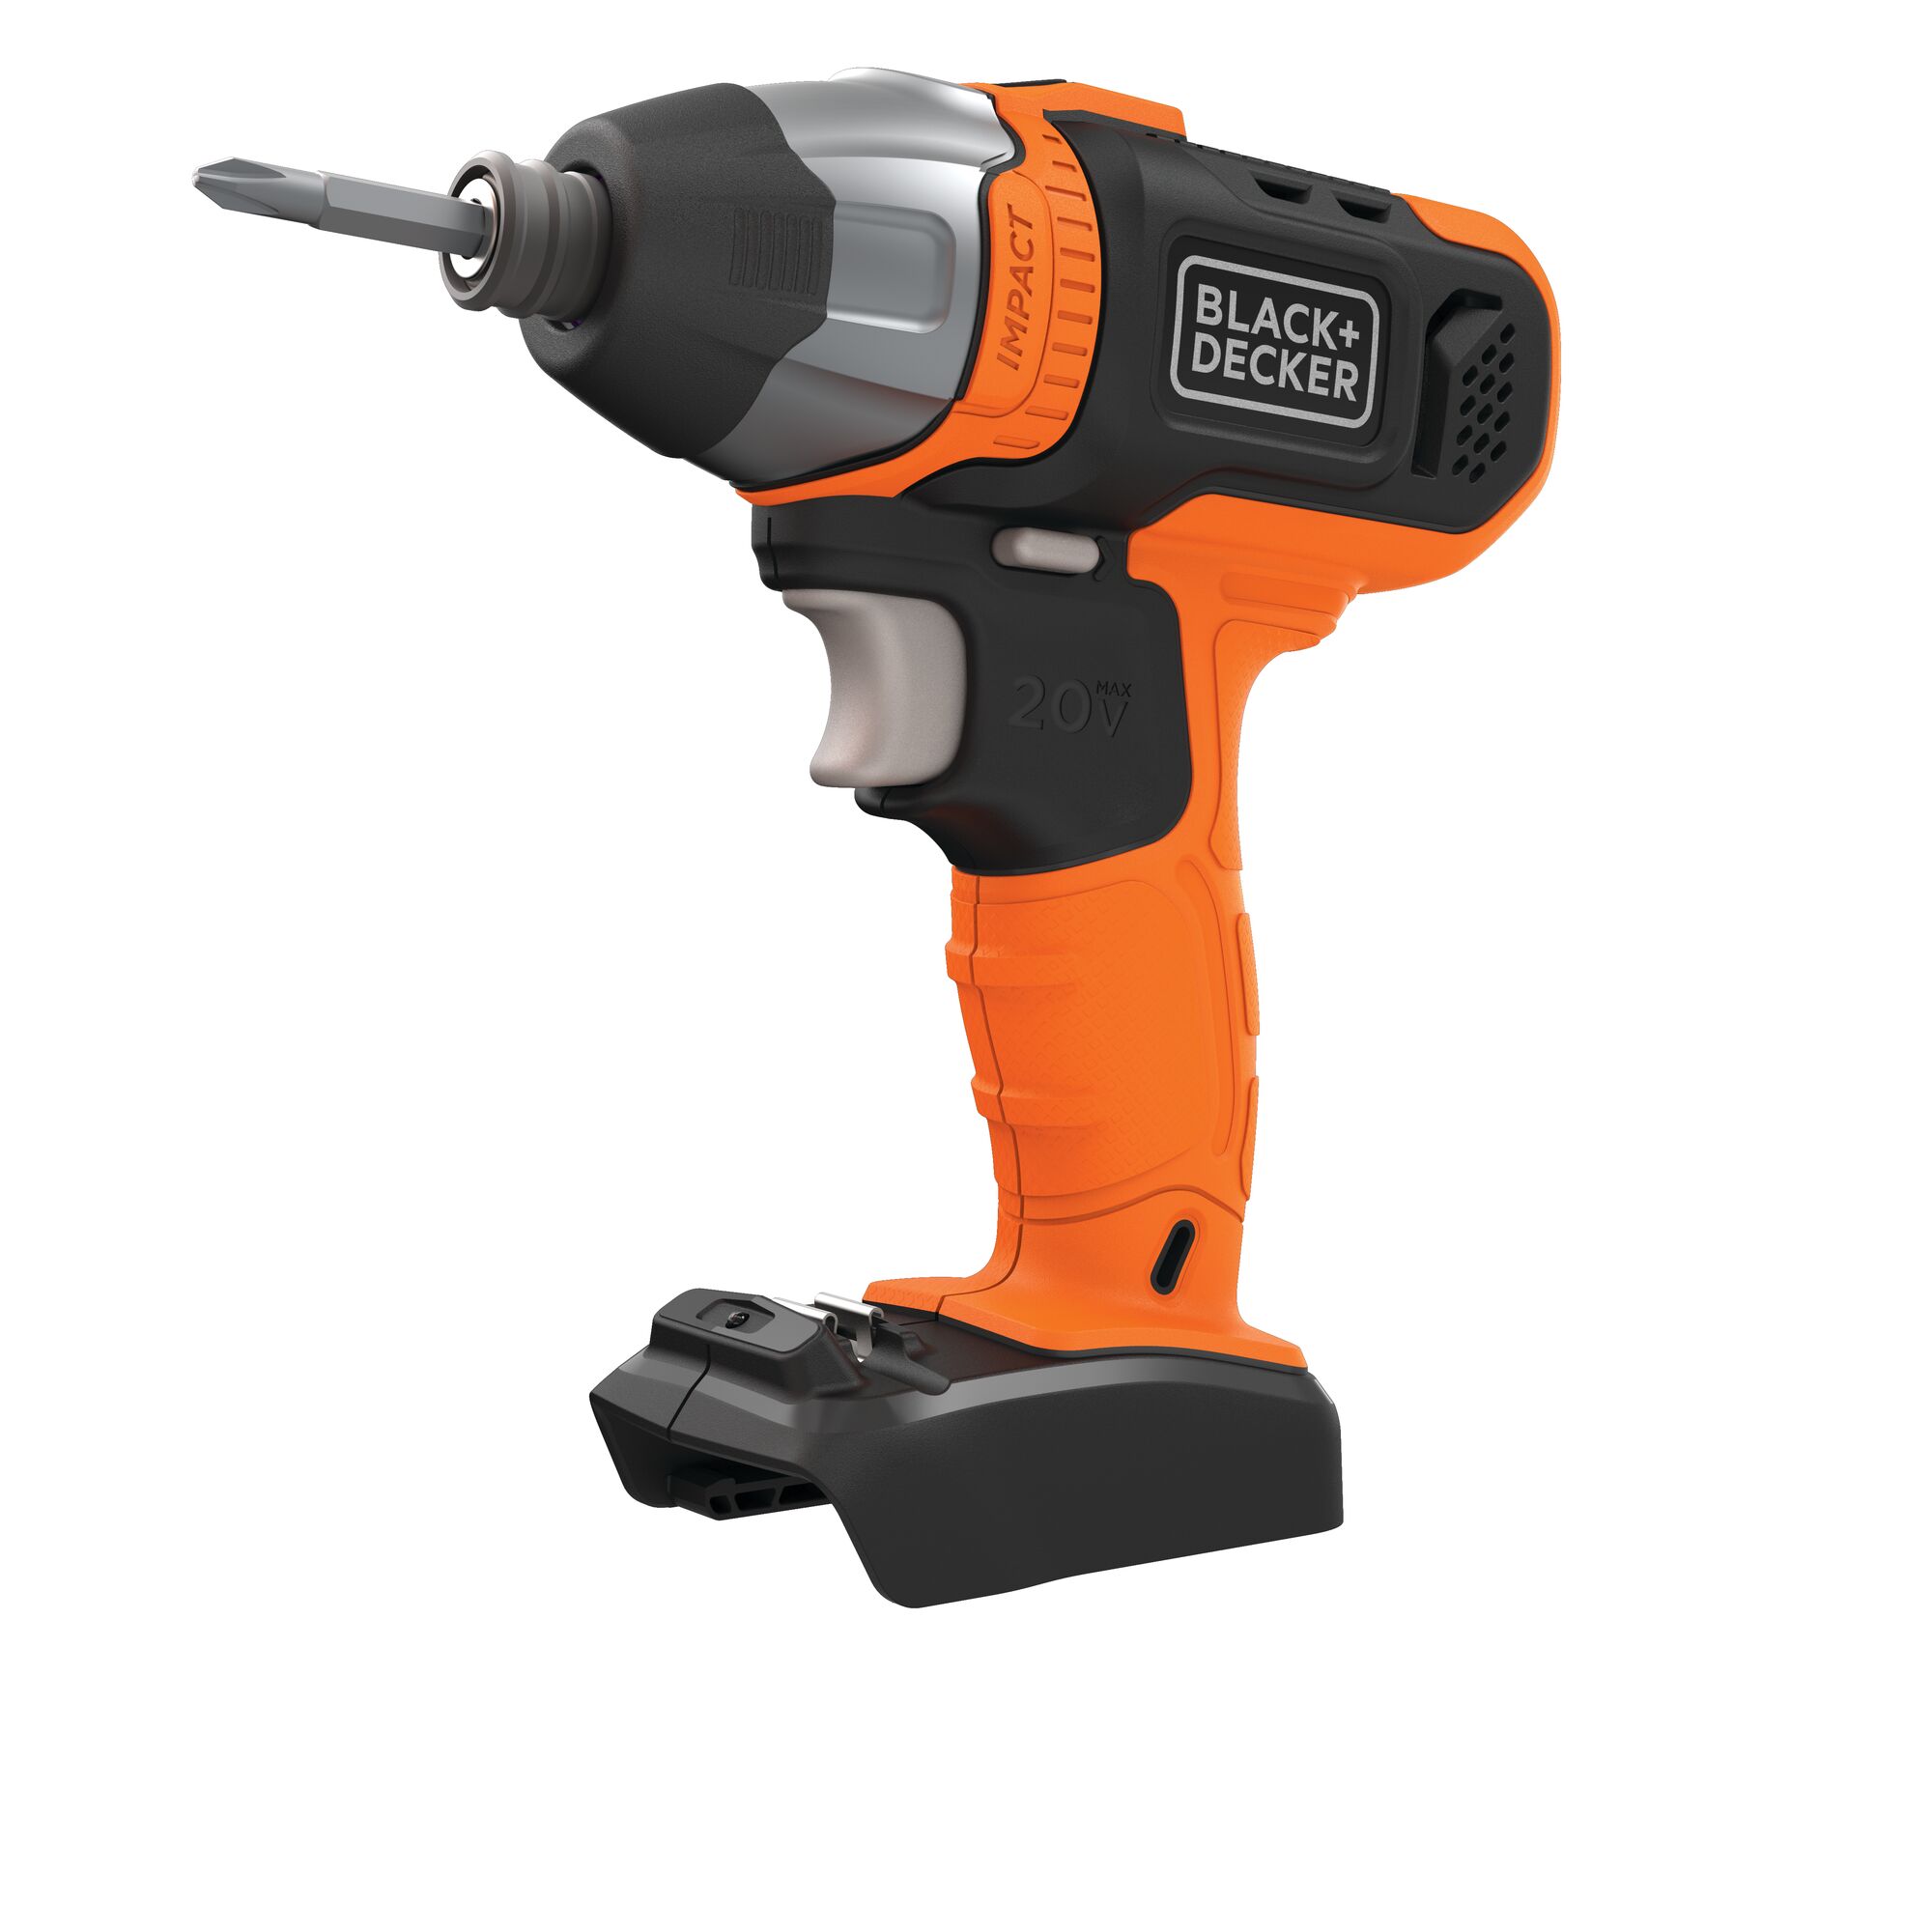 Lithium Ion Drill and Driver.